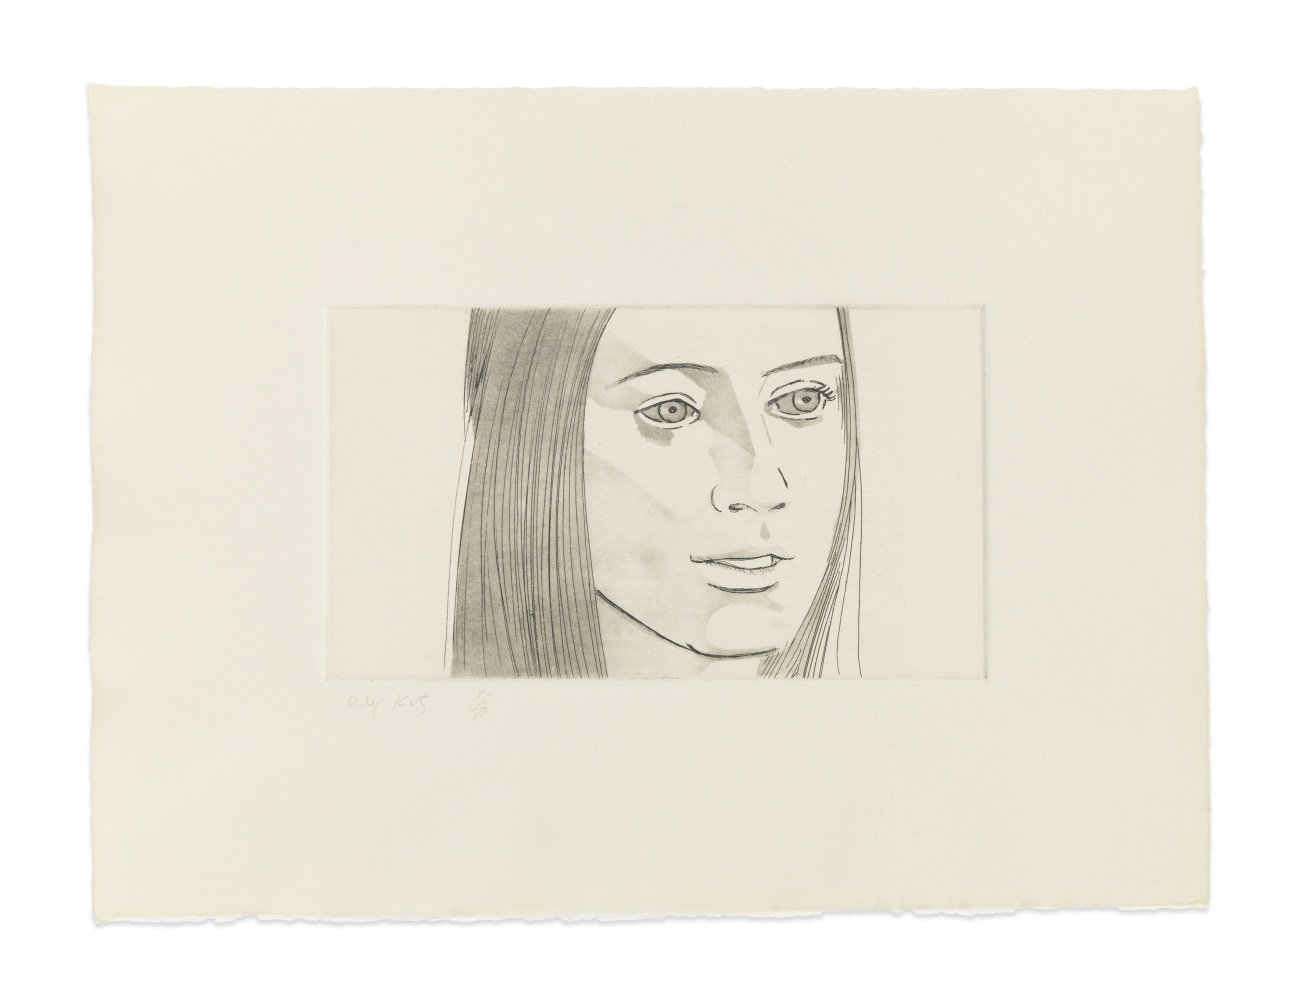 Aquatint by Alex Katz of a portrait of a woman's face at 3/4 view with her mouth slightly open